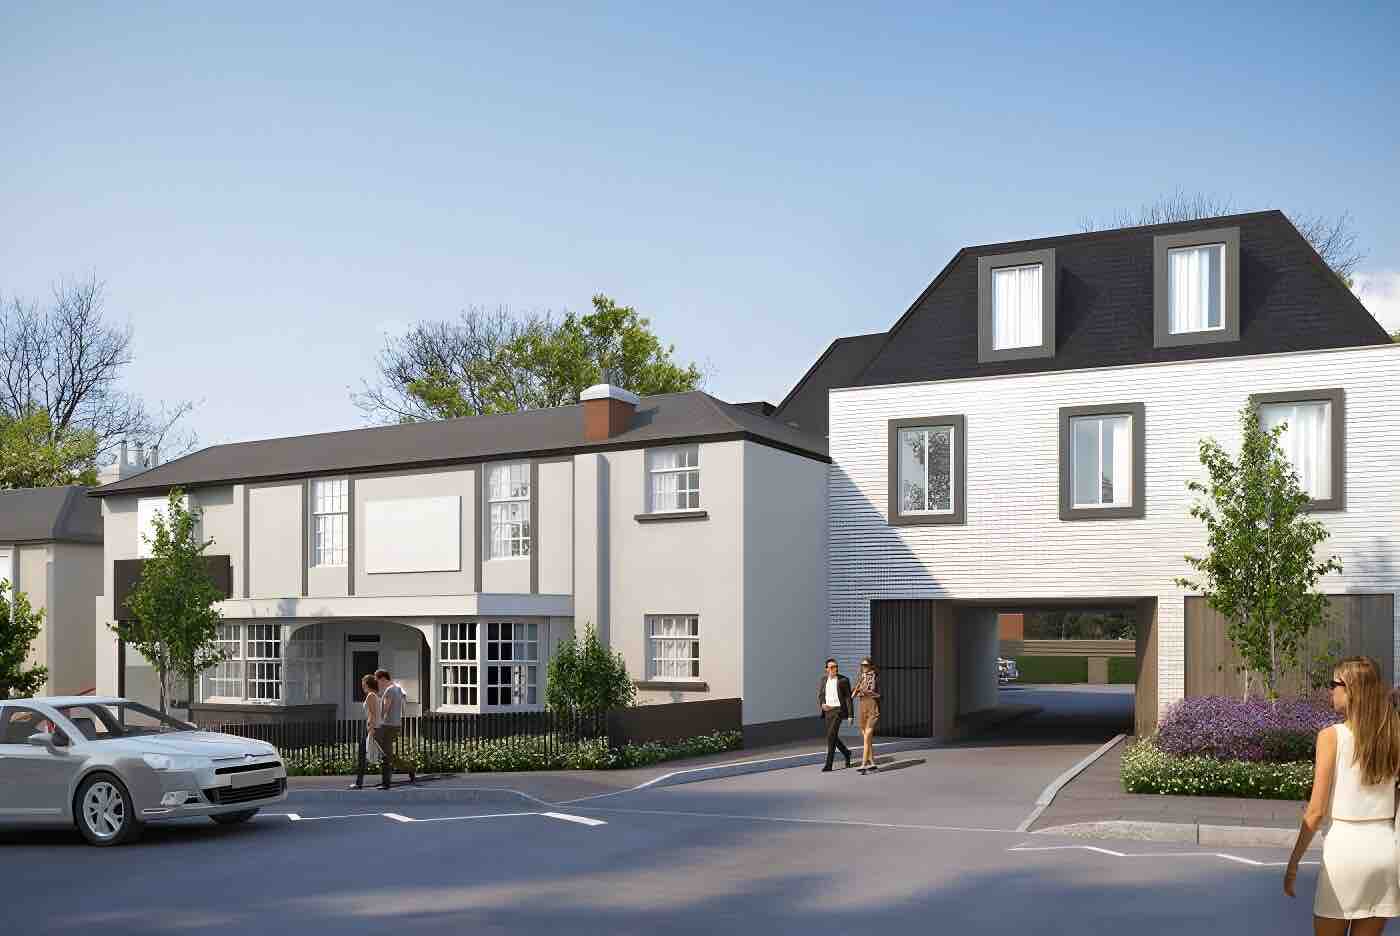 Former Royal Oak Pub in Bushey with consent for 7 apartments